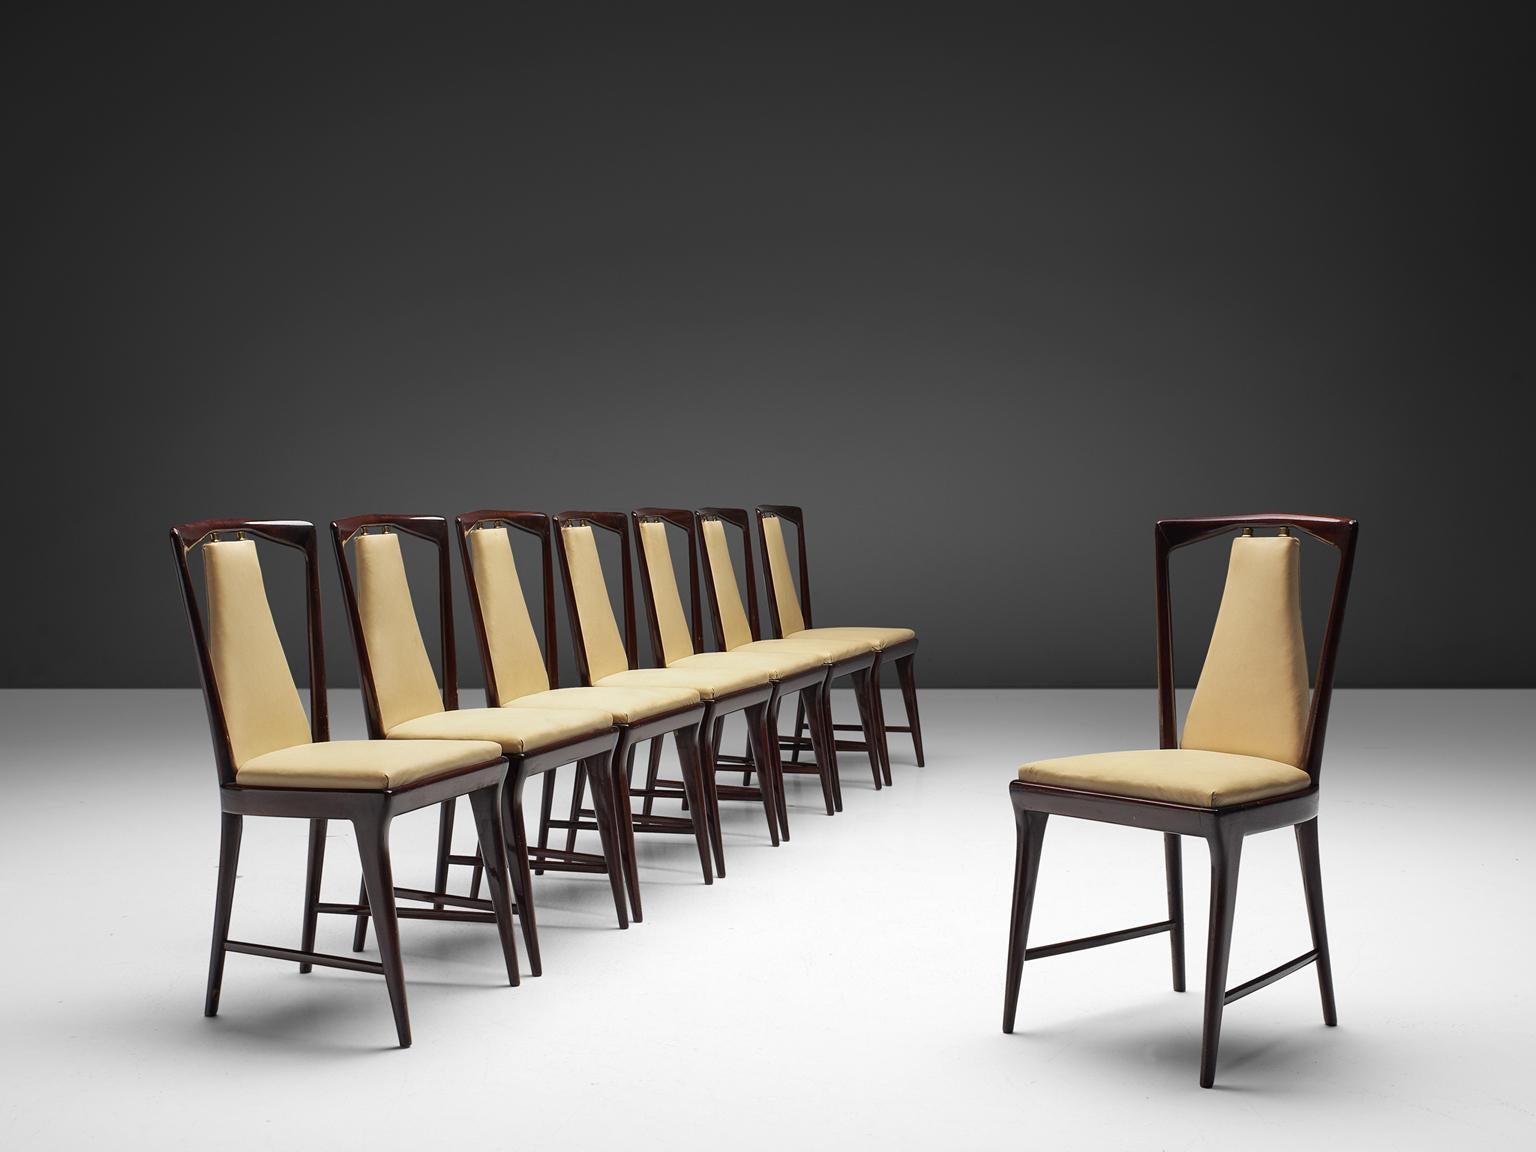 Set of eight dining chairs with beige faux leather and mahogany frame, Italy, 1950s. 

These classic chairs have square seats and delicately shaped backs. The beige seat and back element is connected to the stained mahogany frame via brass joints